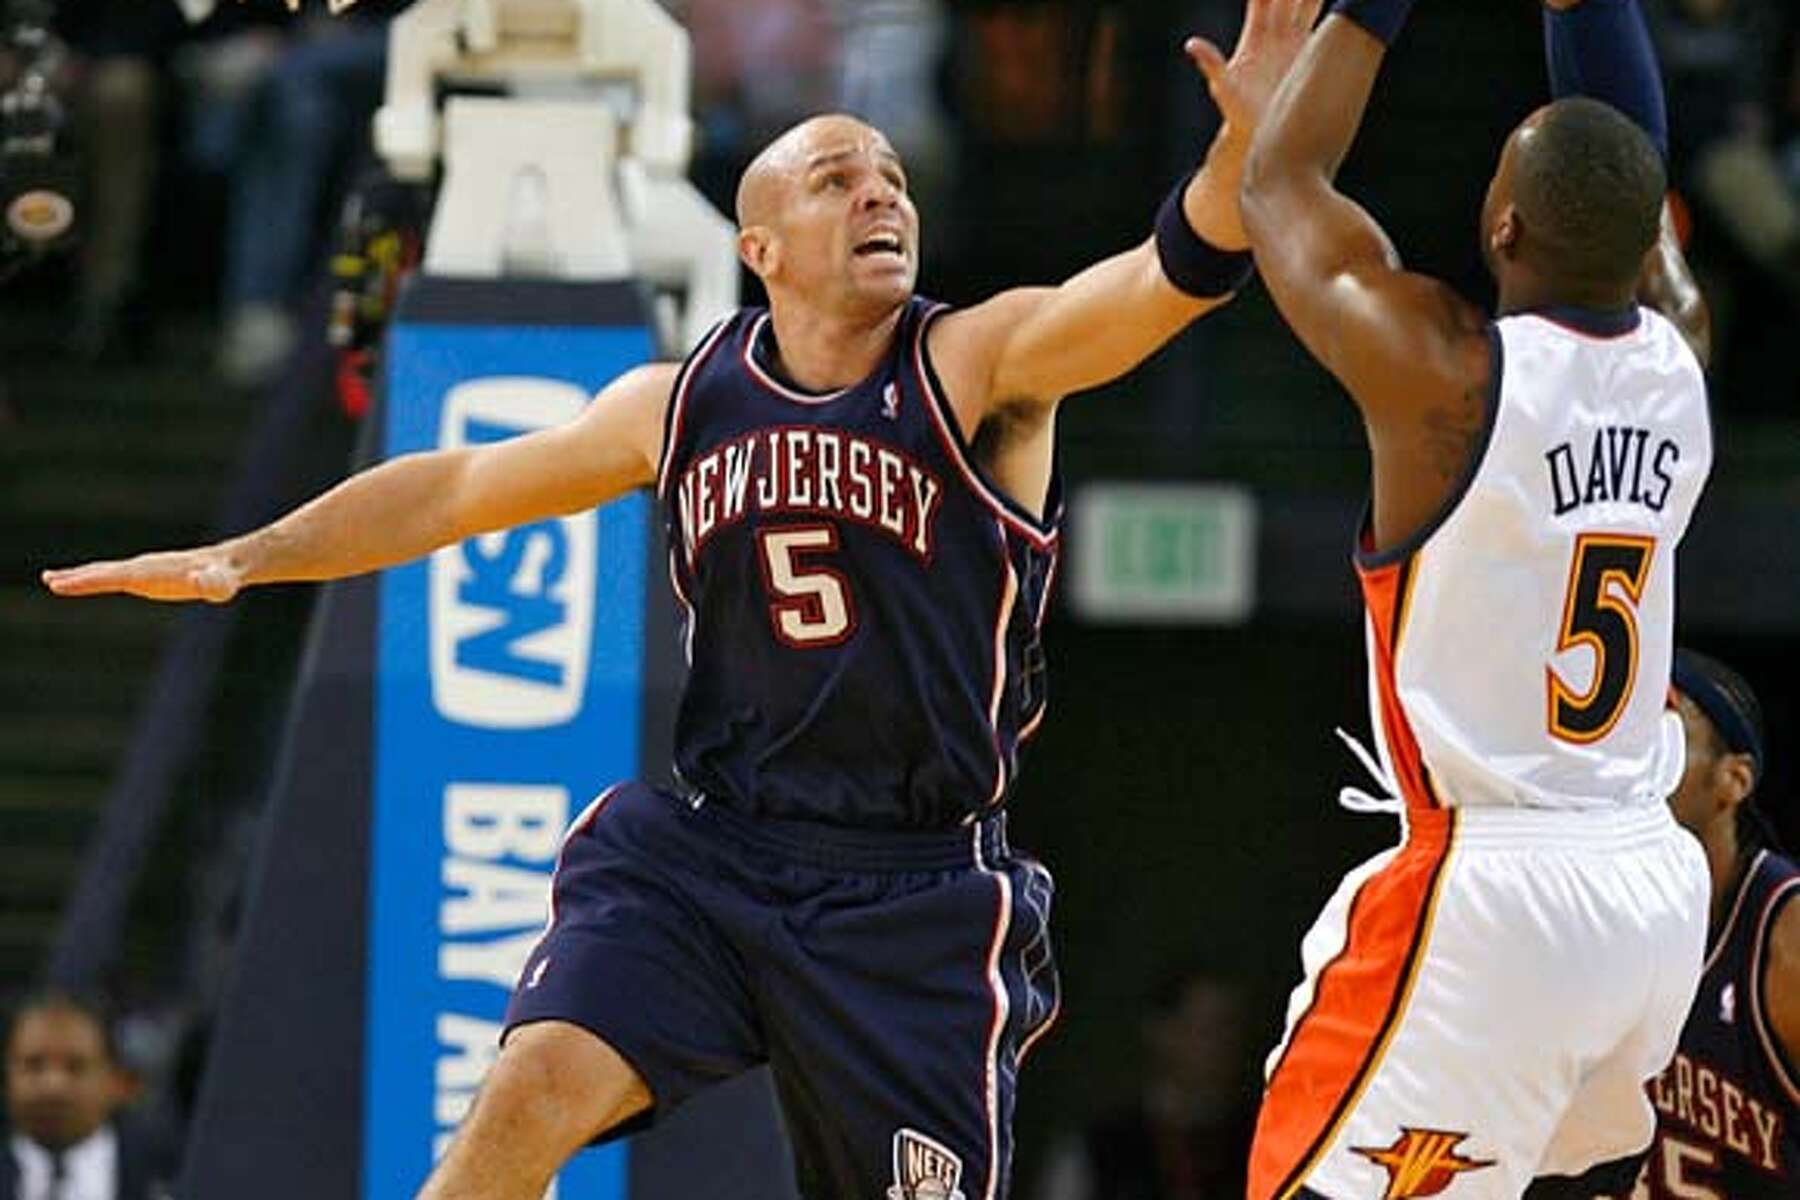 Jason Kidd of the New Jersey Nets attempts a jumpshot over the